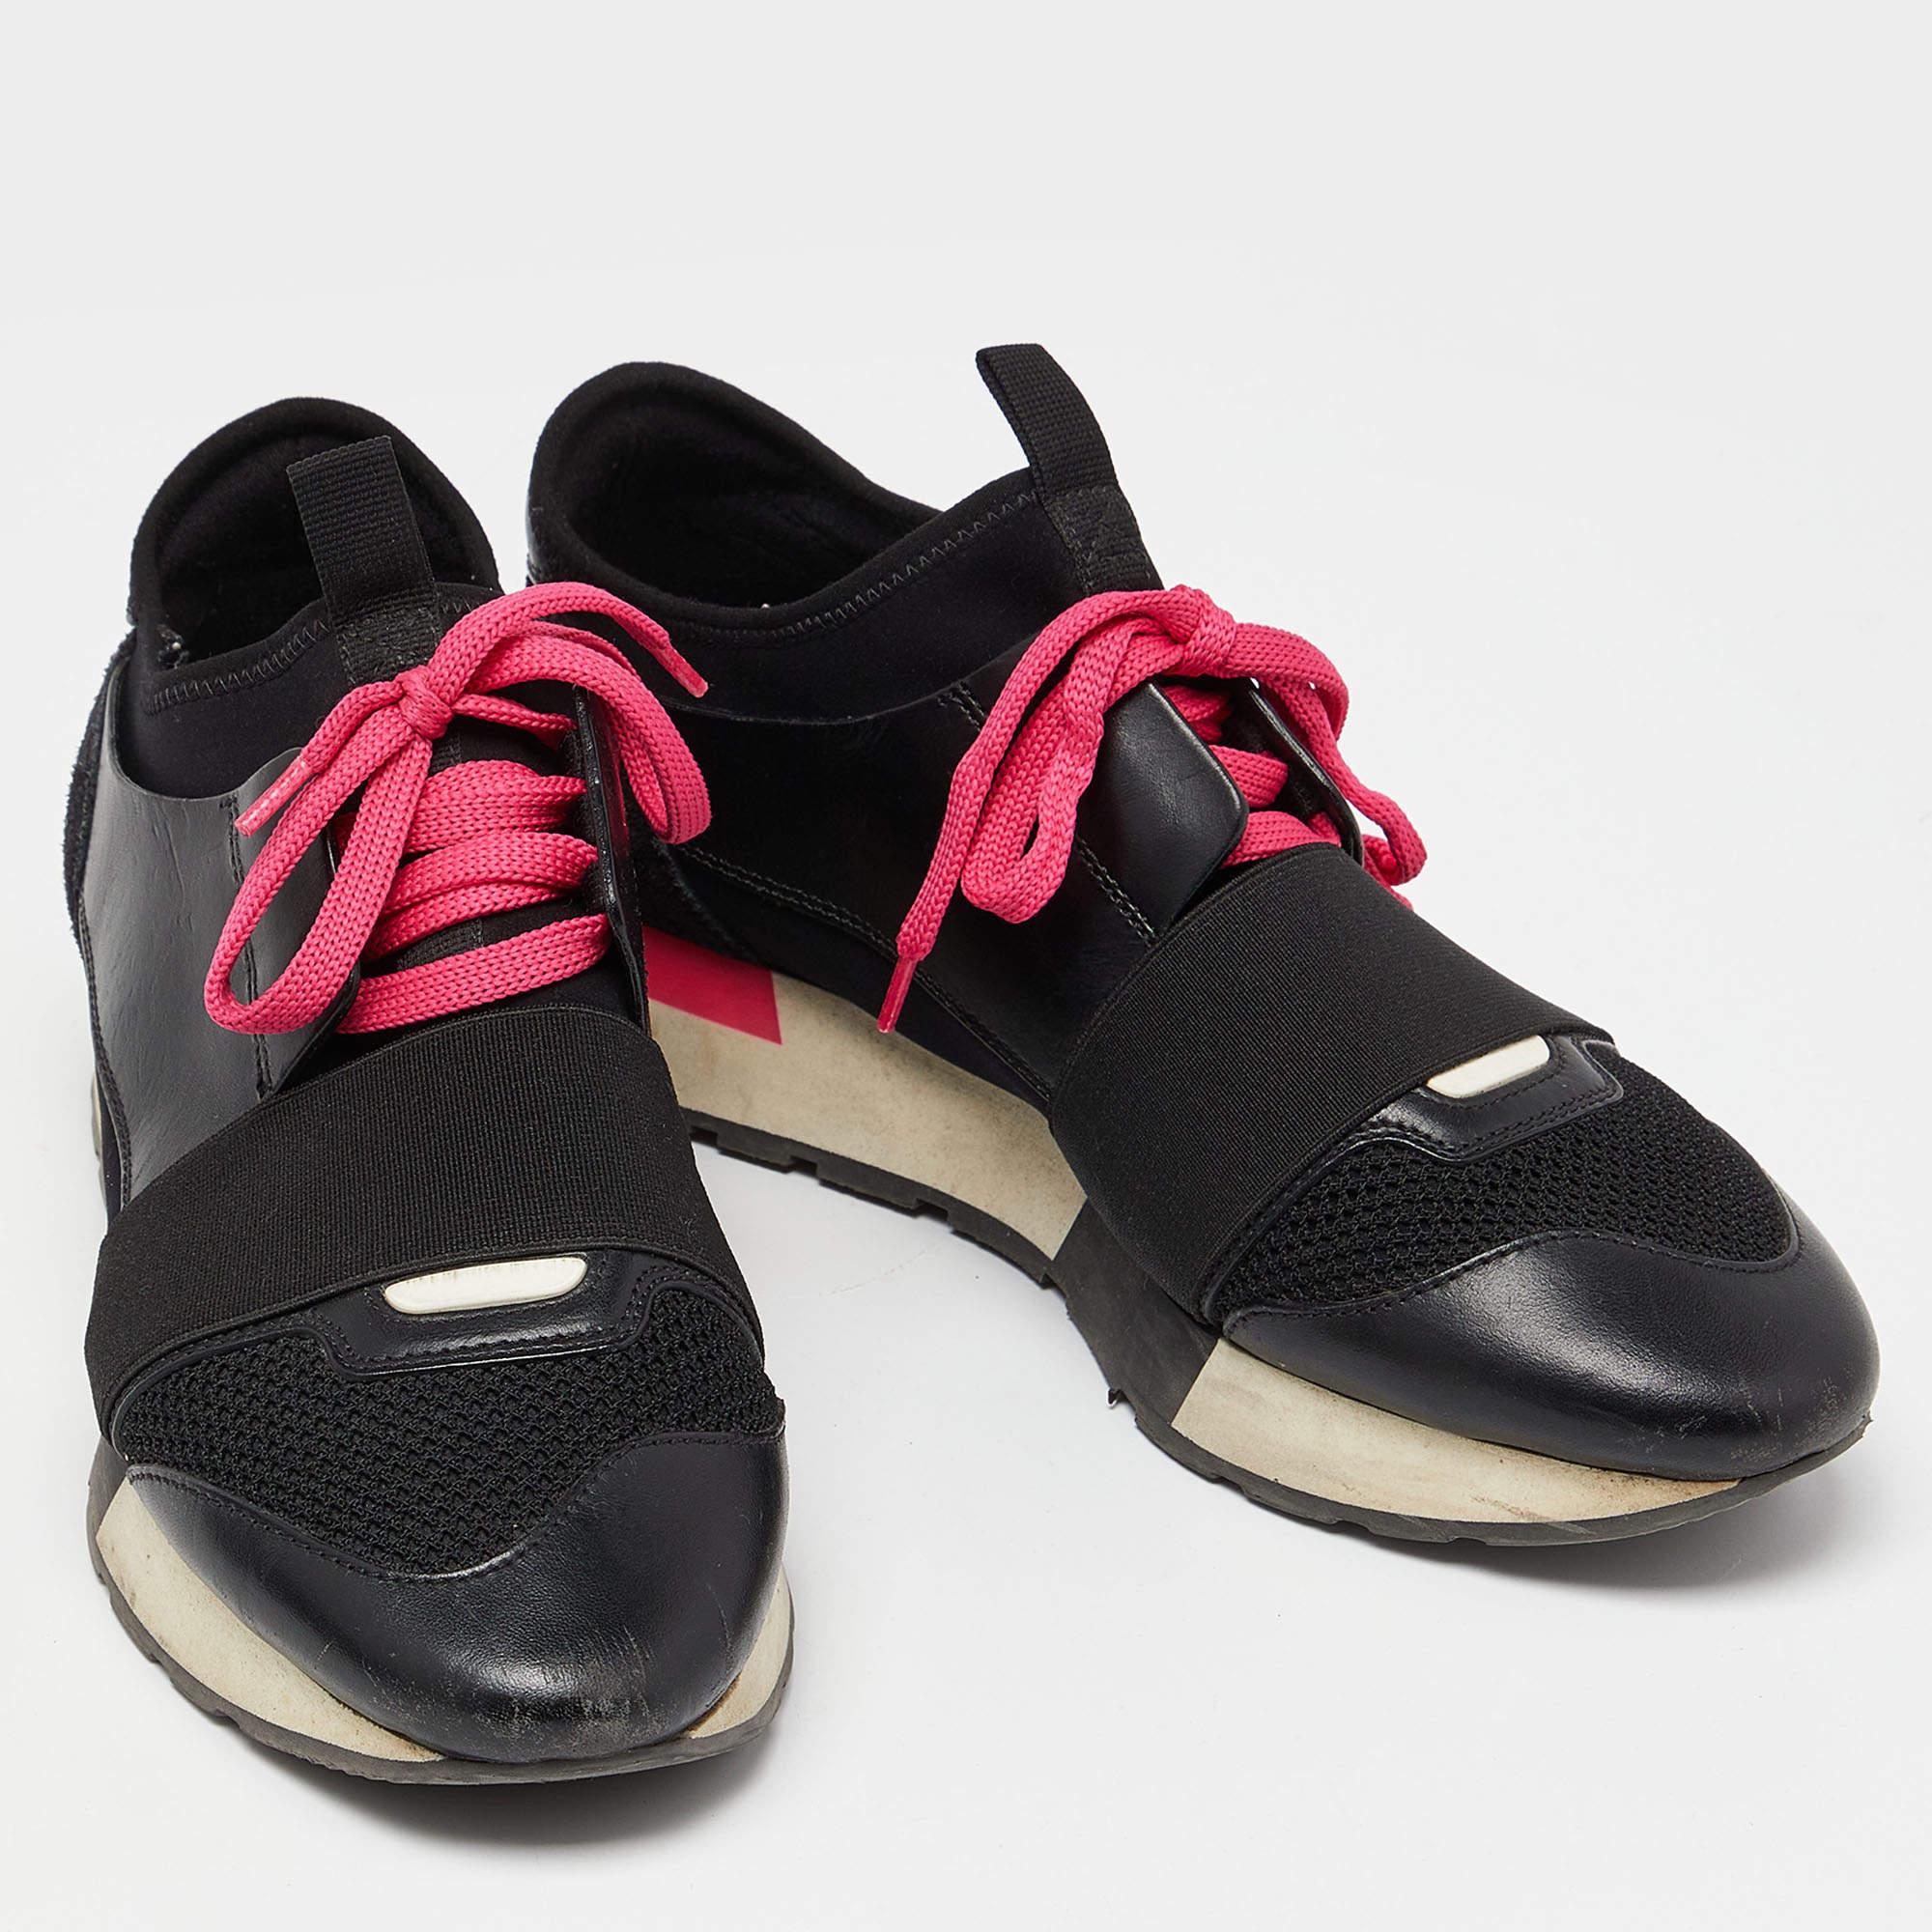 Give your outfit a luxe update with this pair of Balenciaga sneakers. The shoes are sewn perfectly to help you make a statement in them for a long time.

